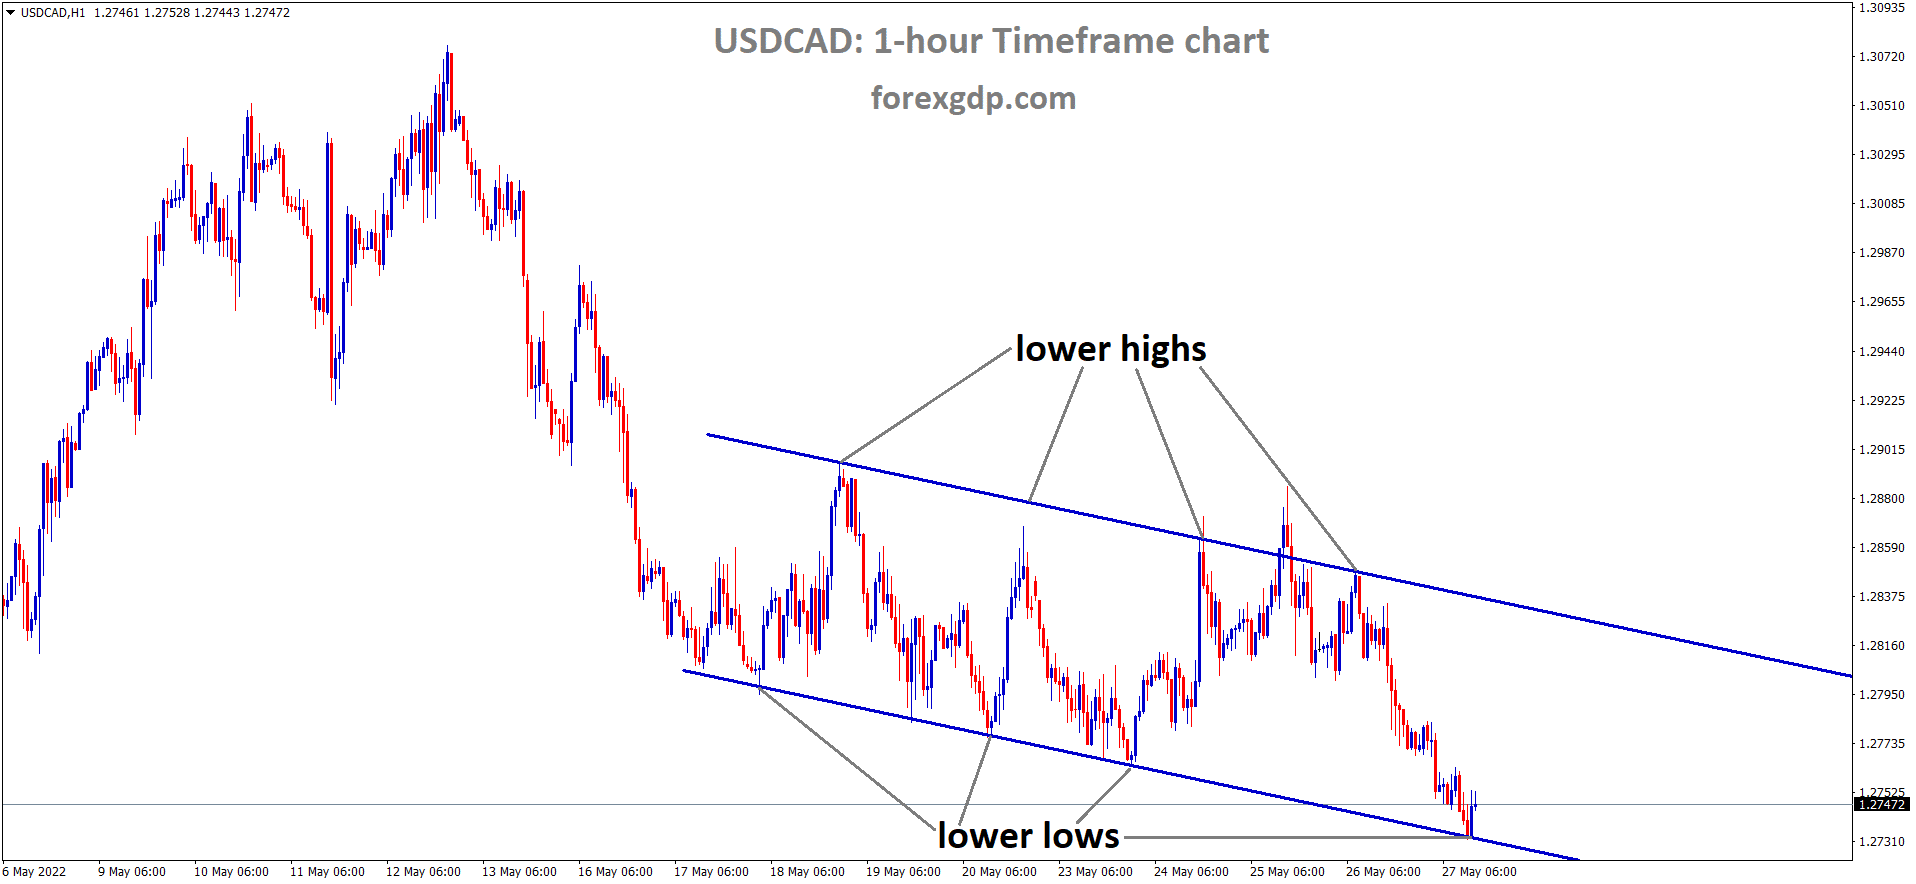 USDCAD H1 Time Frame Analysis Market is moving in the Descending channel and the Market has rebounded from the Lower low area of the channel